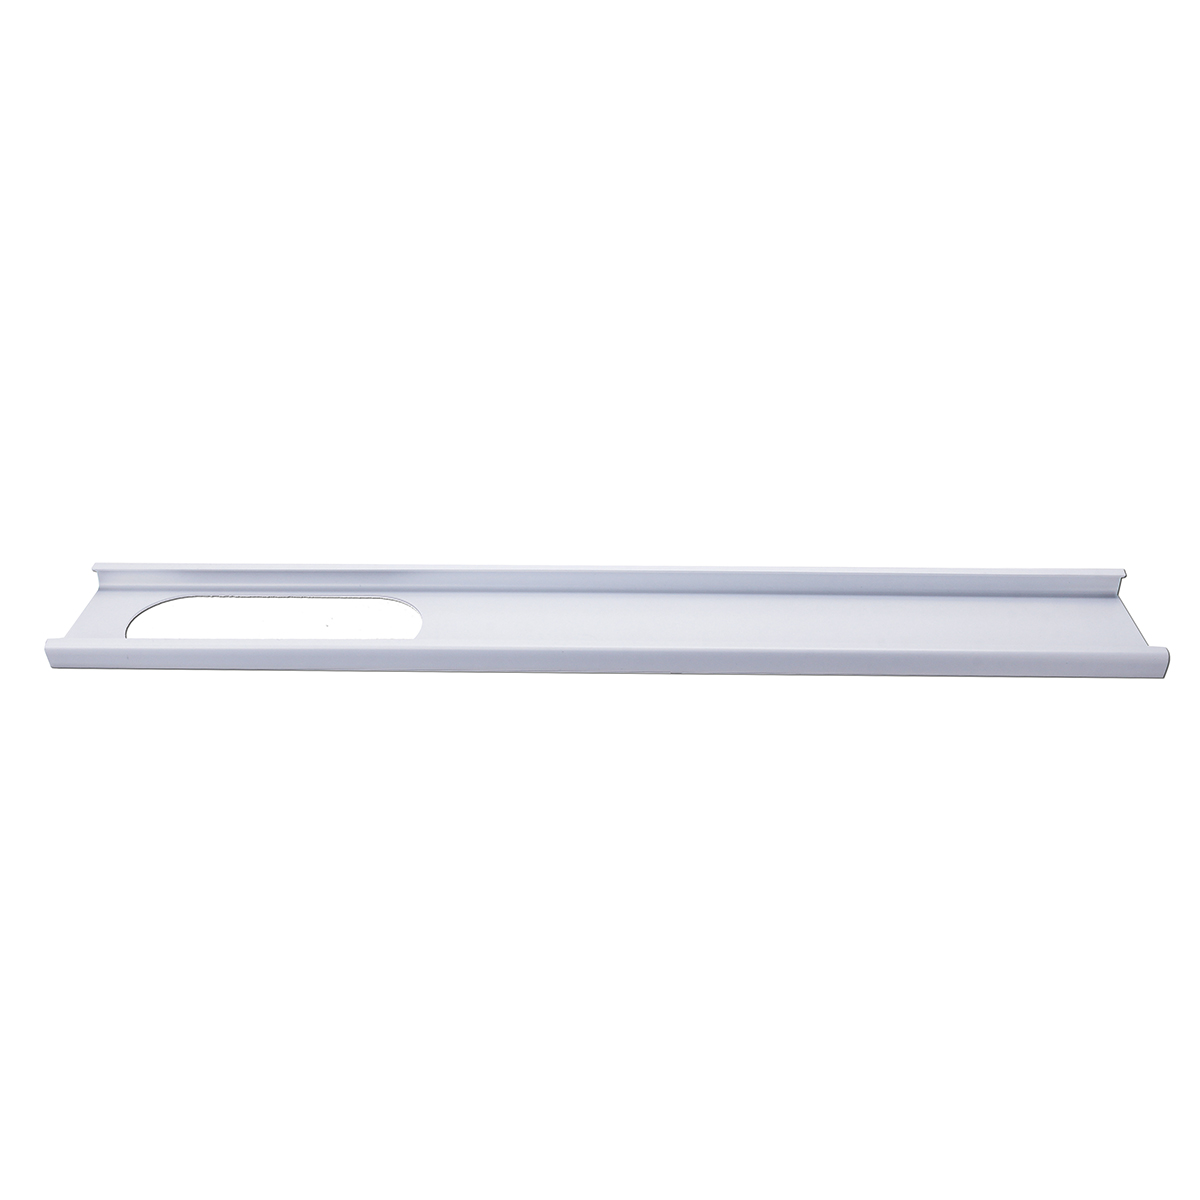 2pcs-675cm-120cm-Adjustable-Window-Slide-Plate-Air-Conditioner-Wind-Shield-for-Air-Conditioner-1716034-4